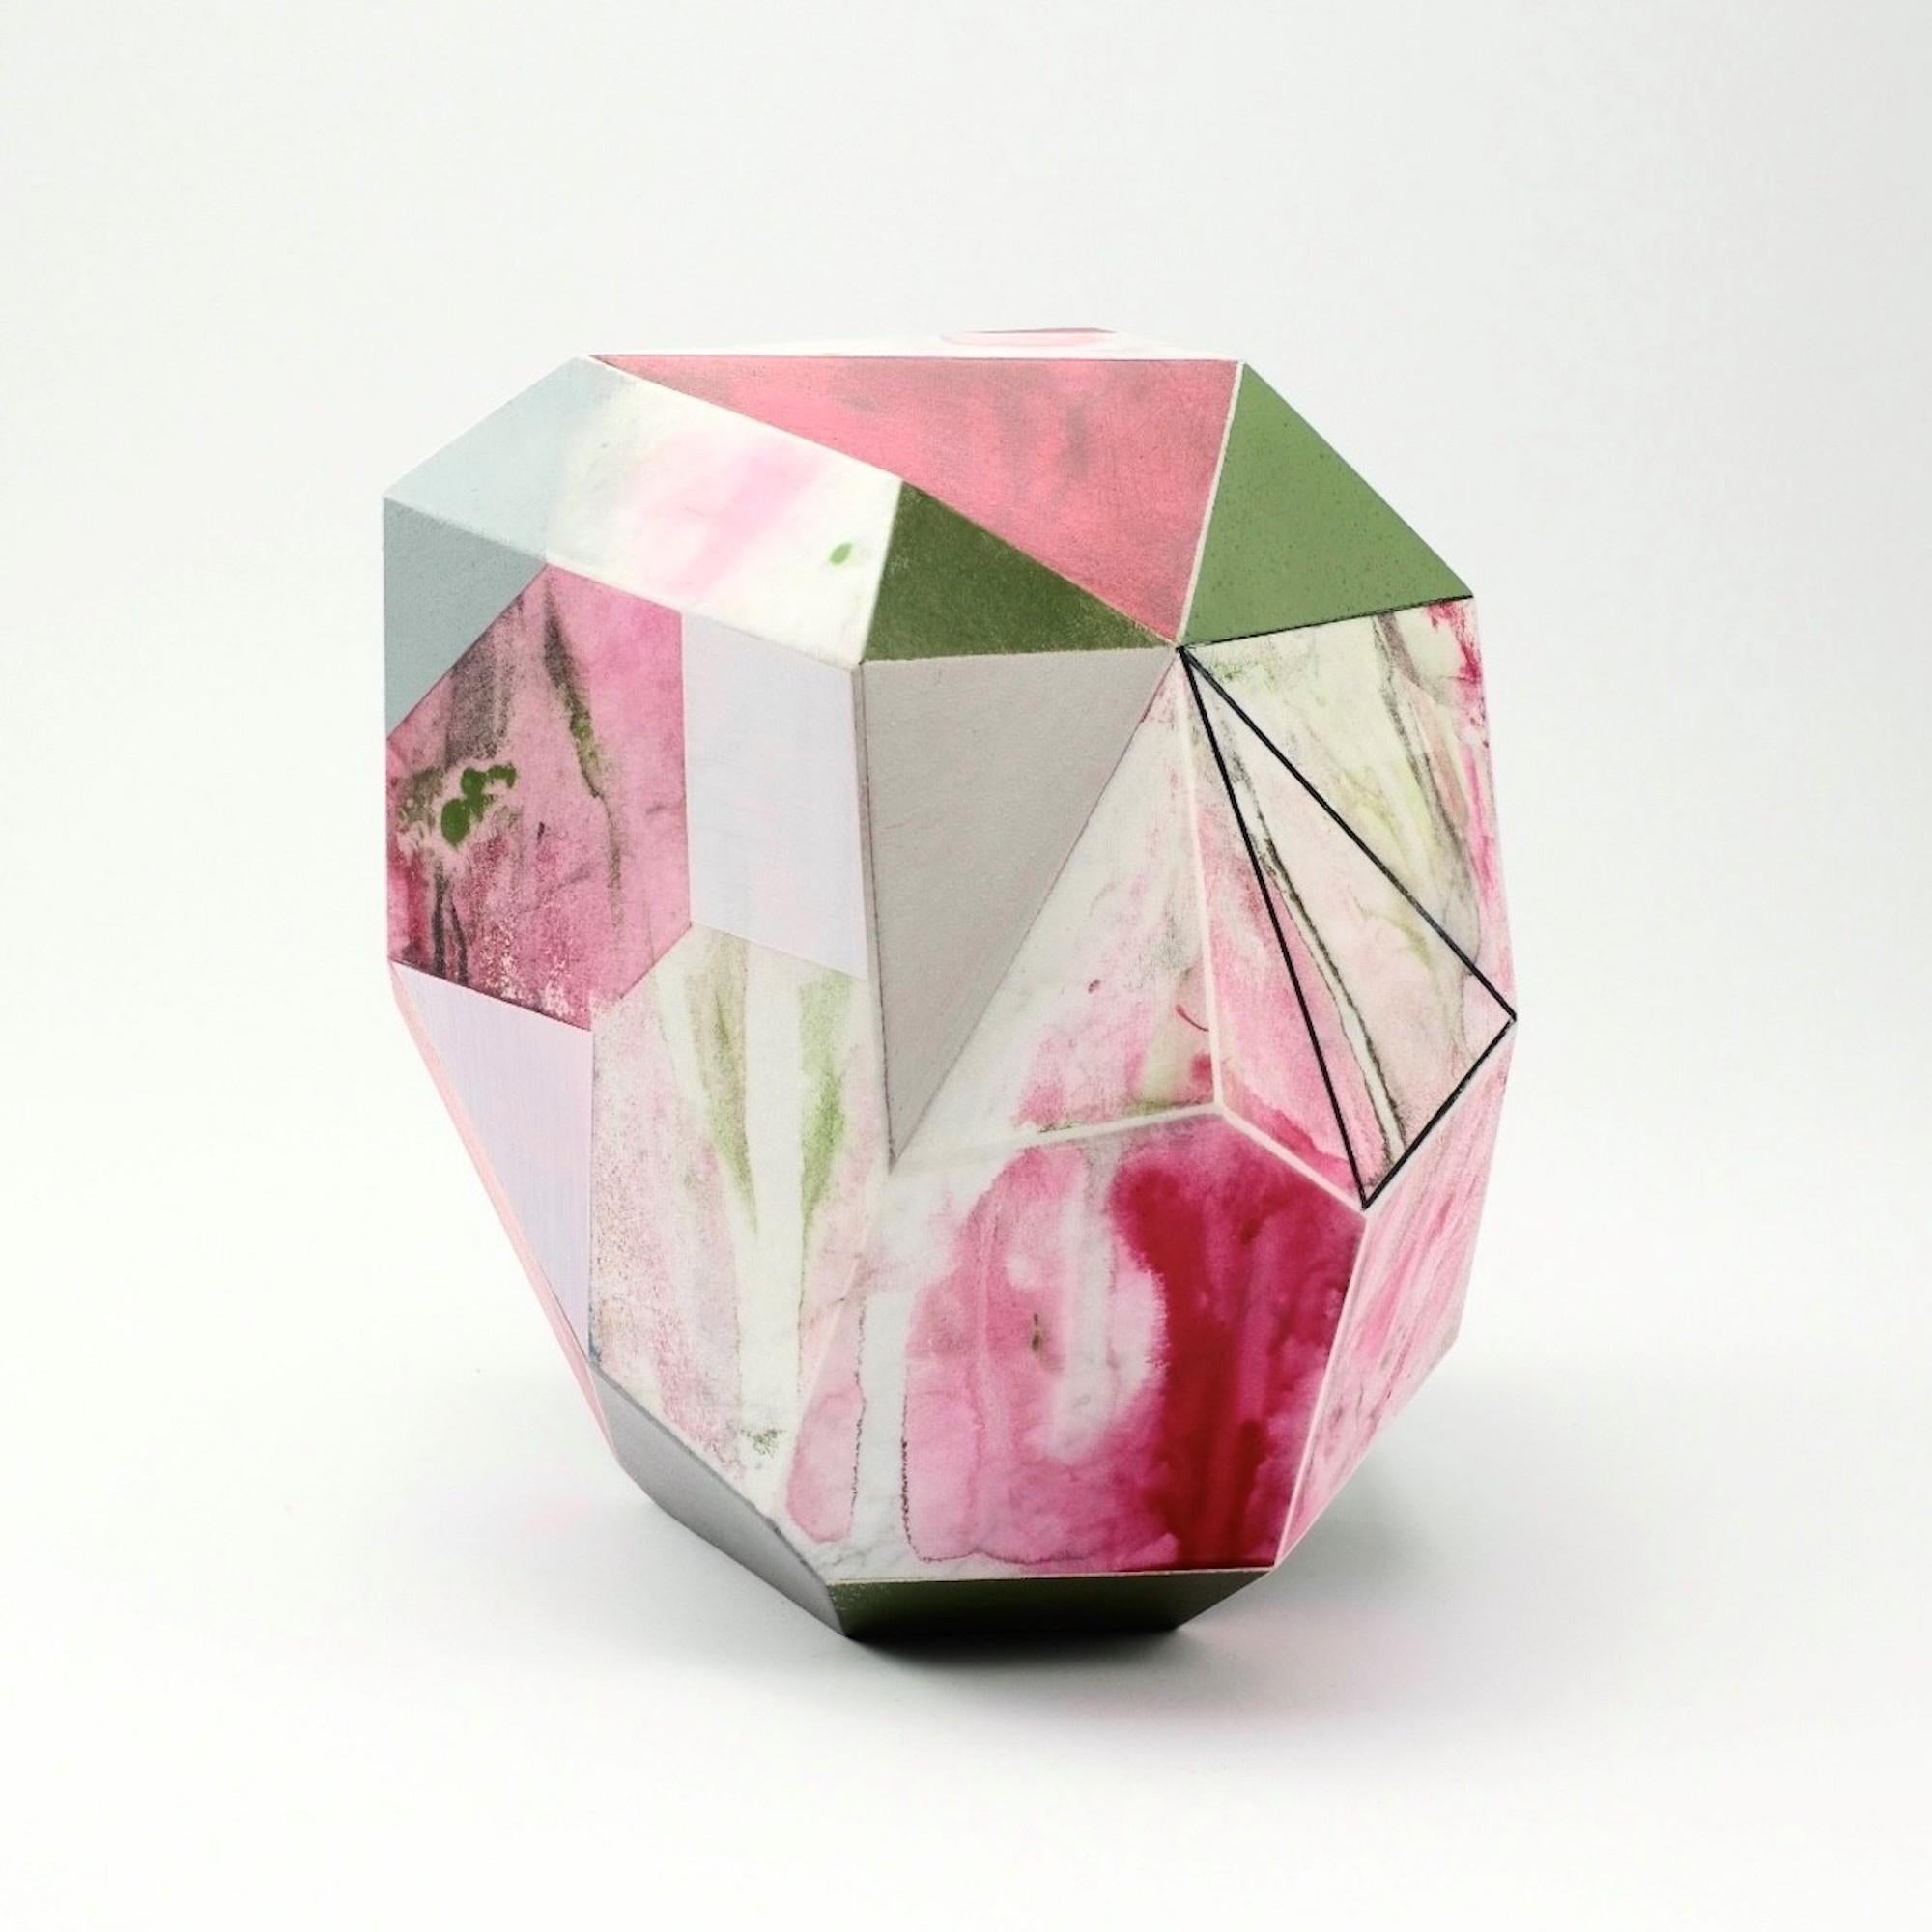 Luna by Richard Perry - Abstract sculpture, Carrara marble, colourful, paint For Sale 1